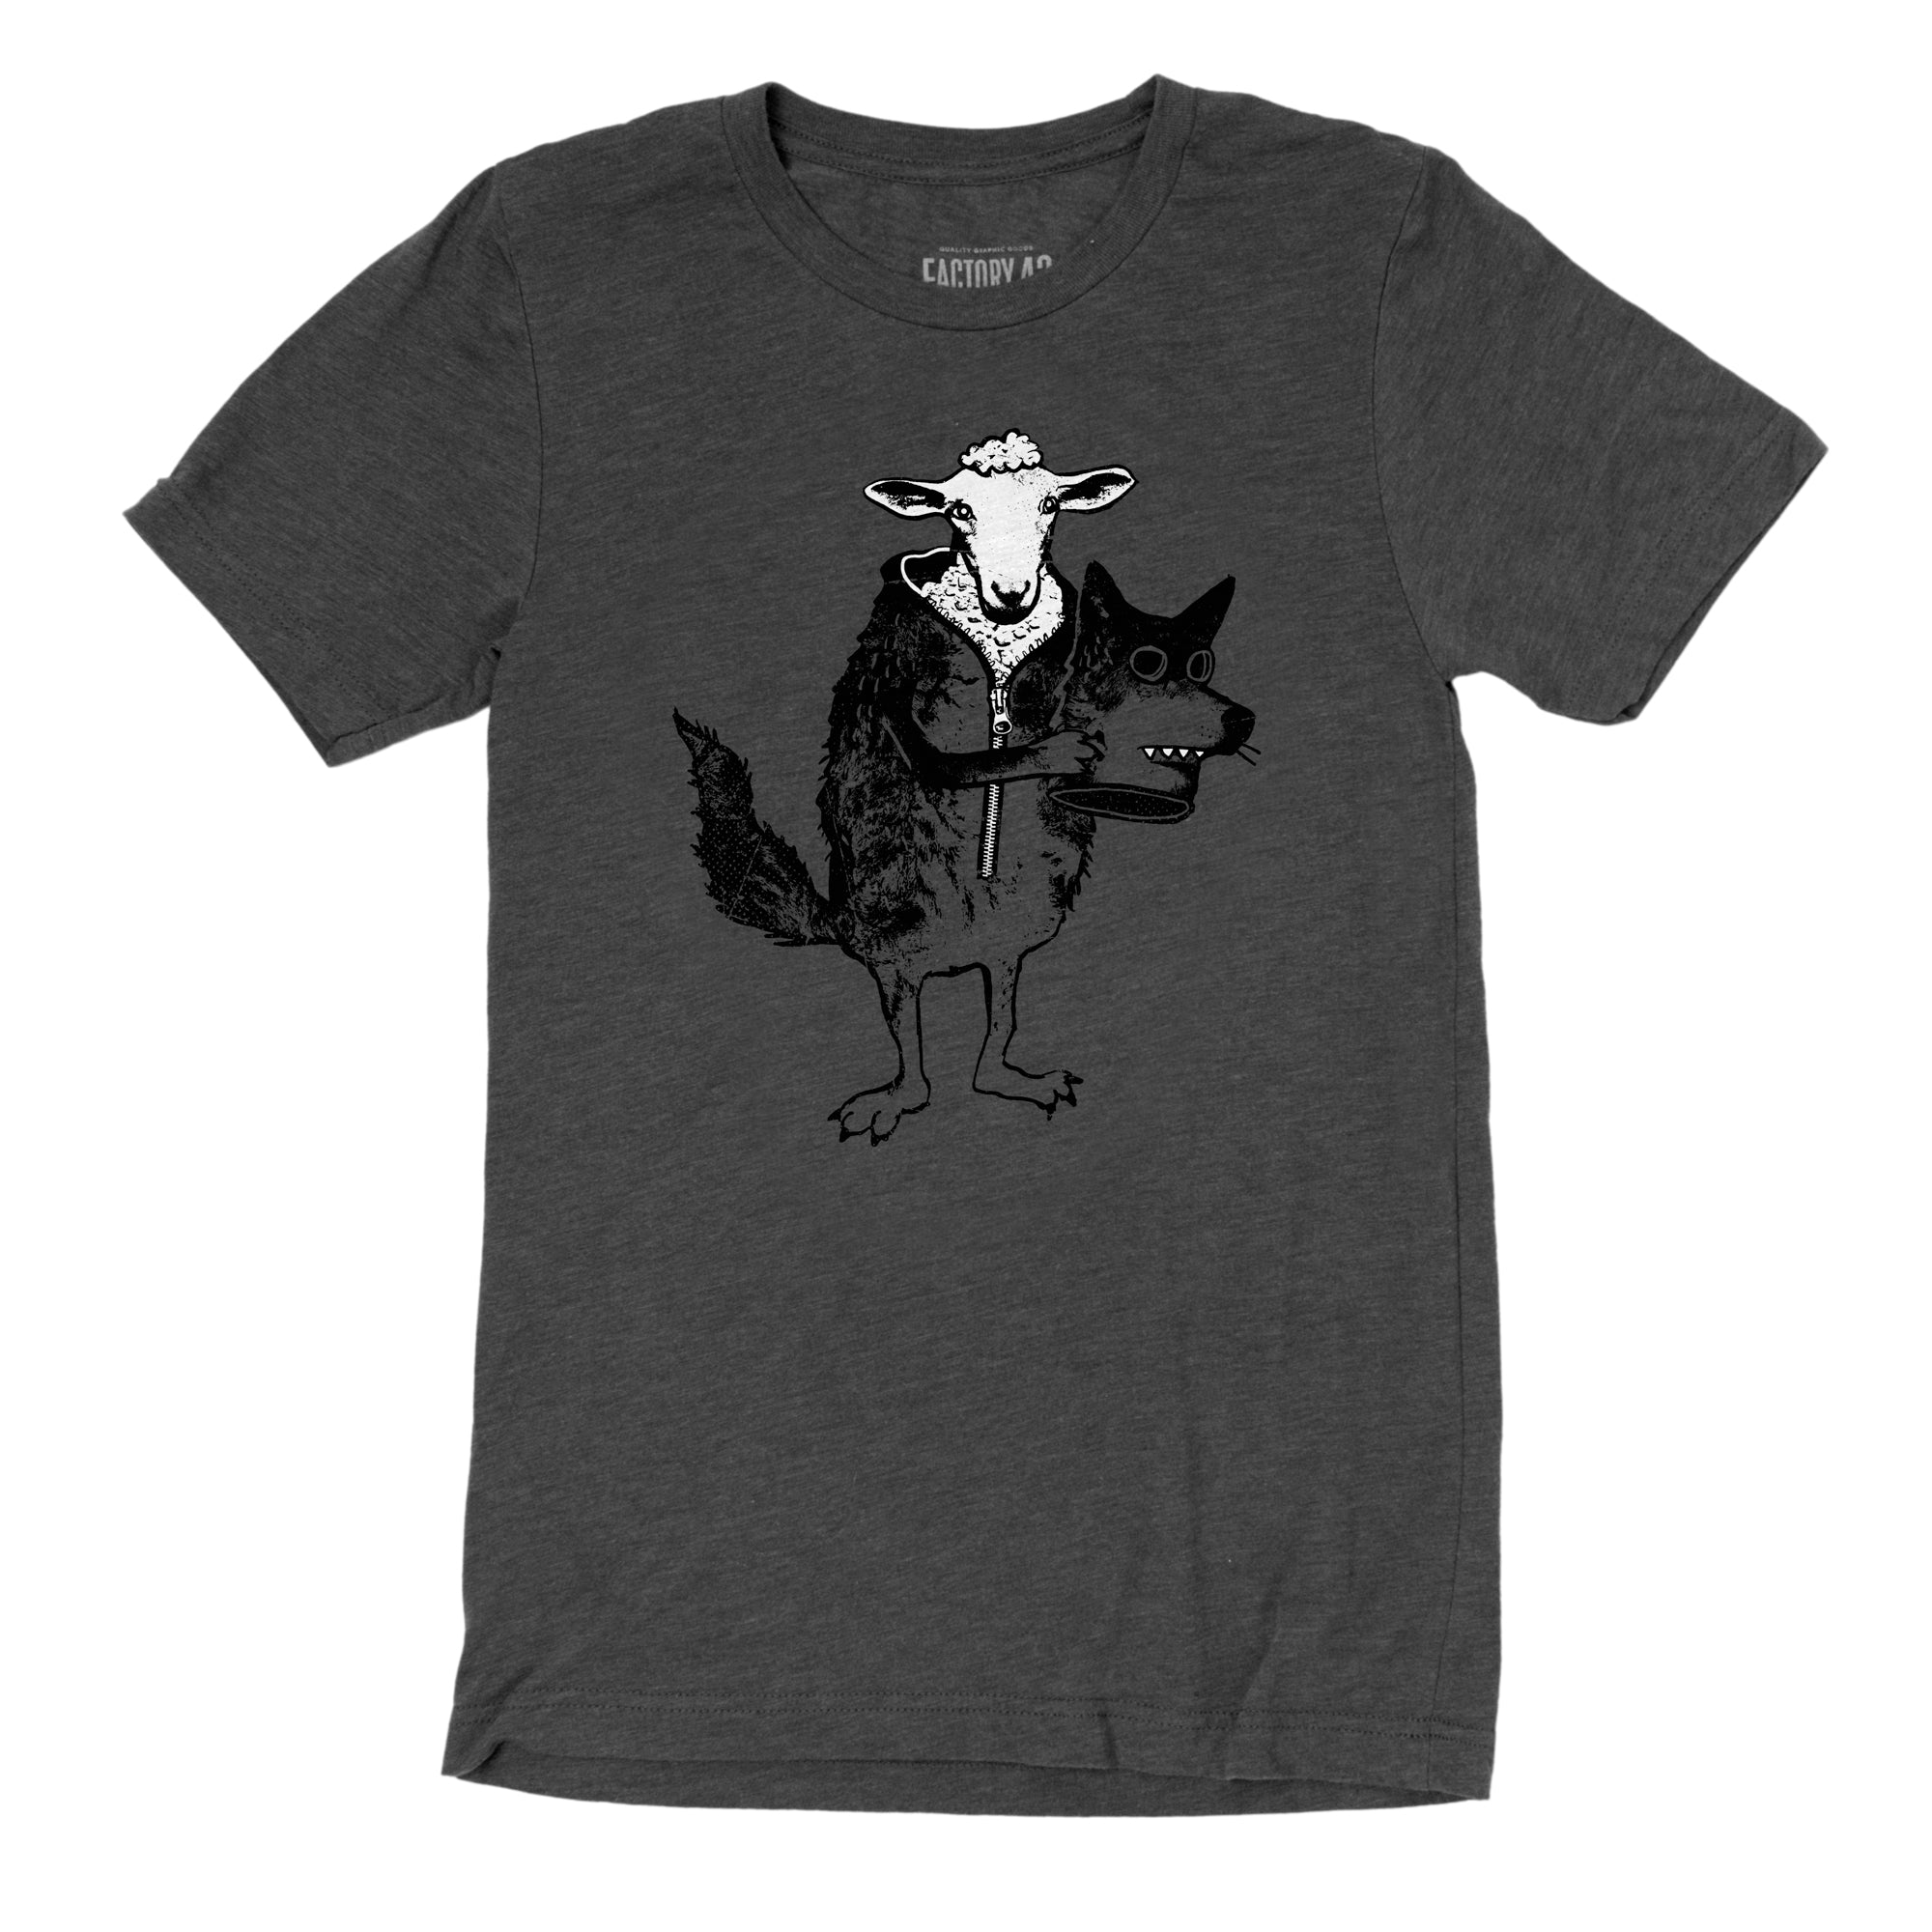 Super soft gray black mens/womens tshirt of a sheep wearing a wolf's costume. Factory 43 is a graphic design studio that makes art with a PNW vibe that reflects their Midwest/Southern roots. This cotton/polyester/rayon shirt printed in Seattle, Washington.